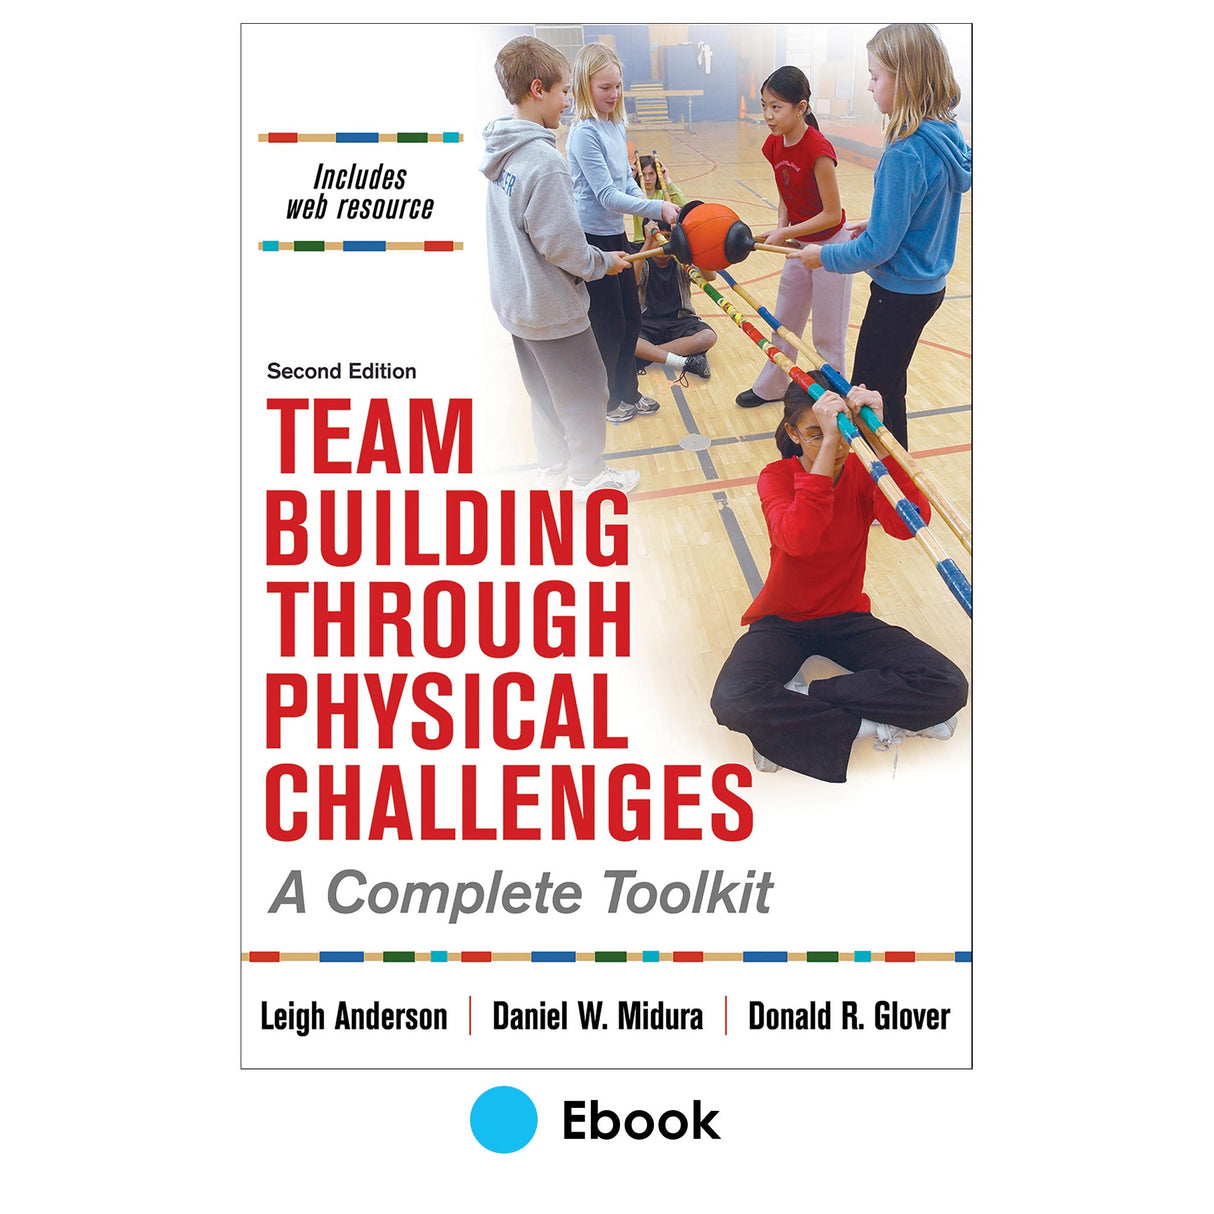 Team Building Through Physical Challenges 2nd Edition epub With Web Resource